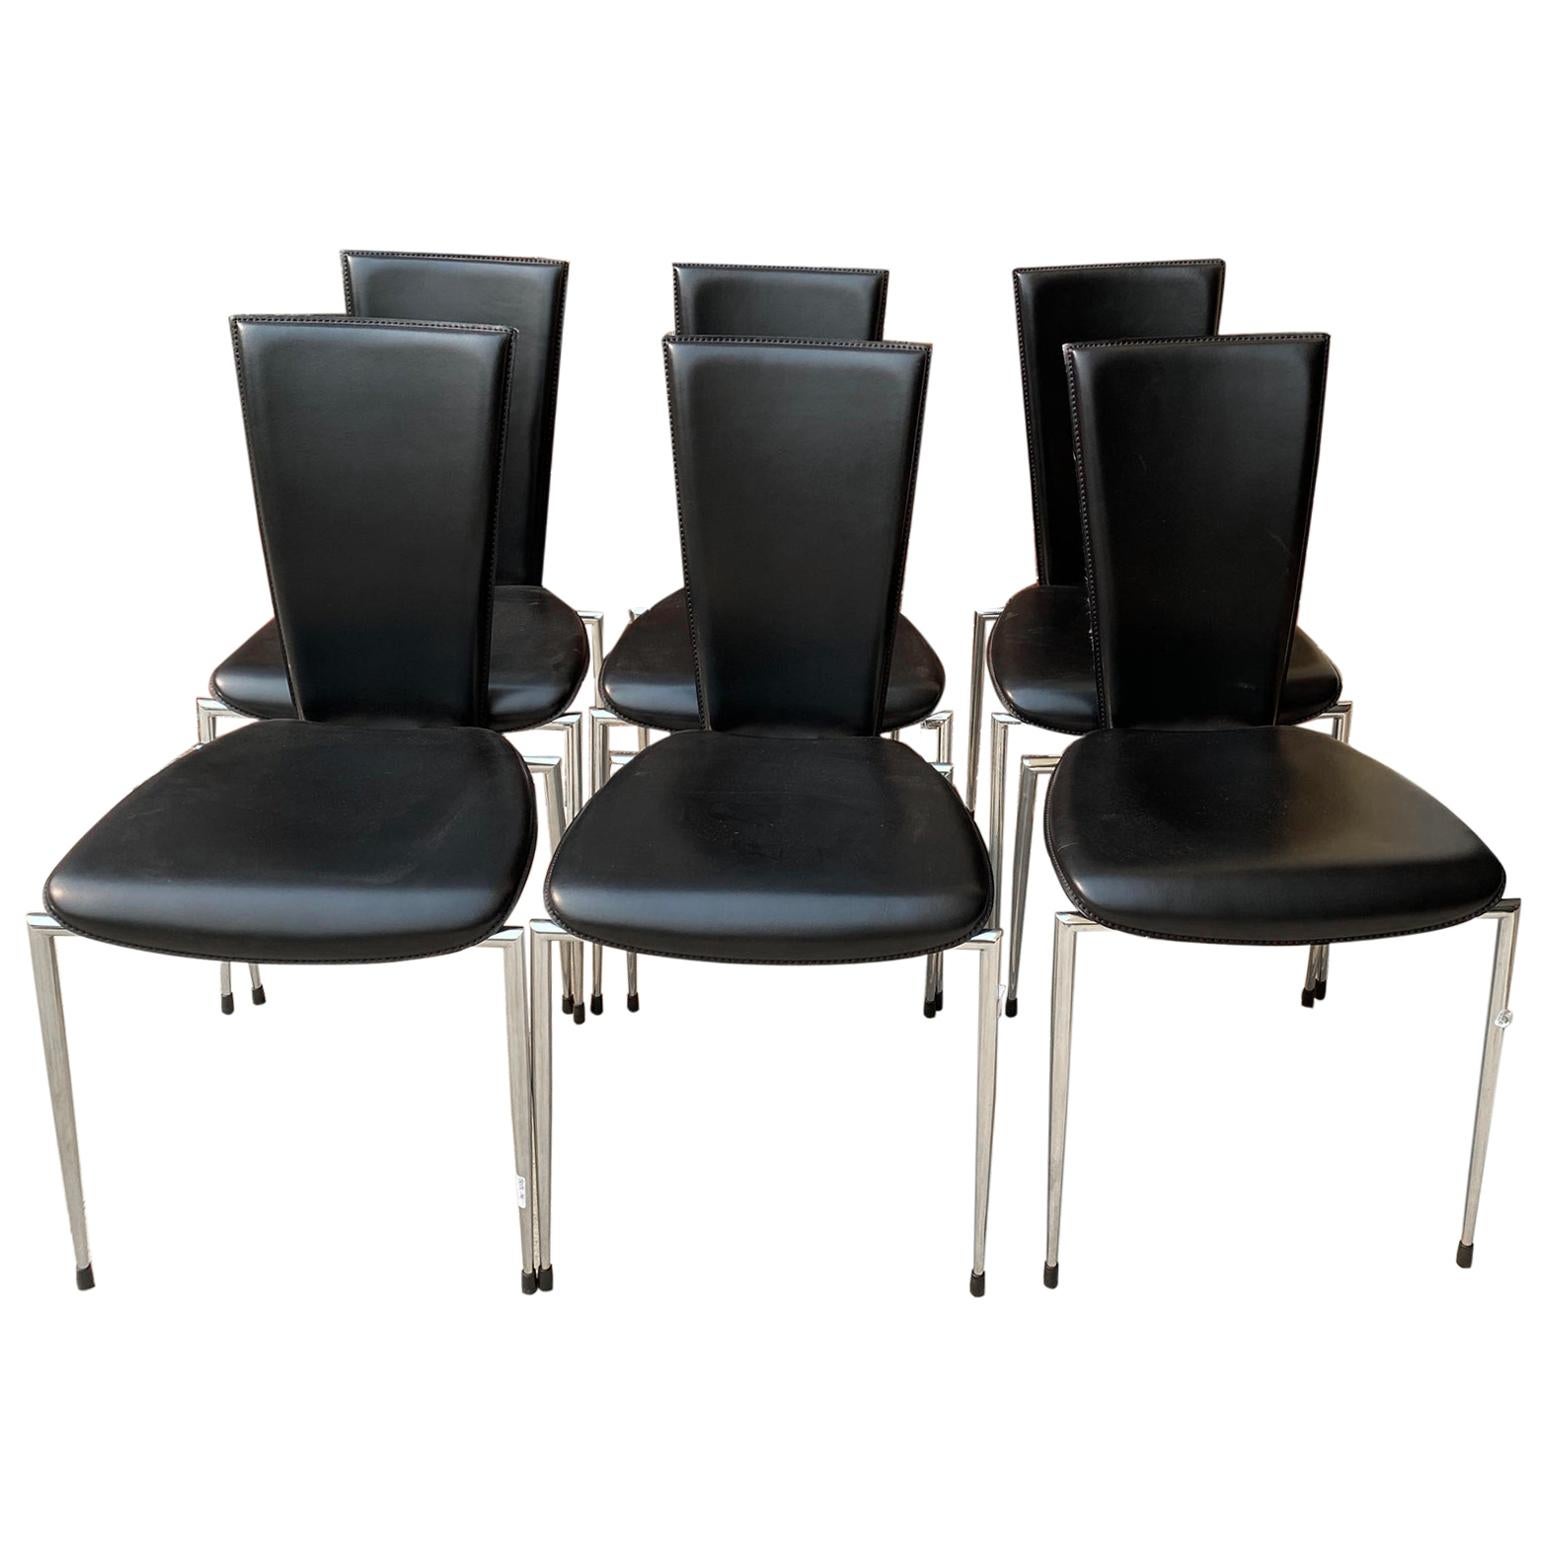 Chrome Italian Modern Dining Chairs, Chrome And Leather Dining Chairs